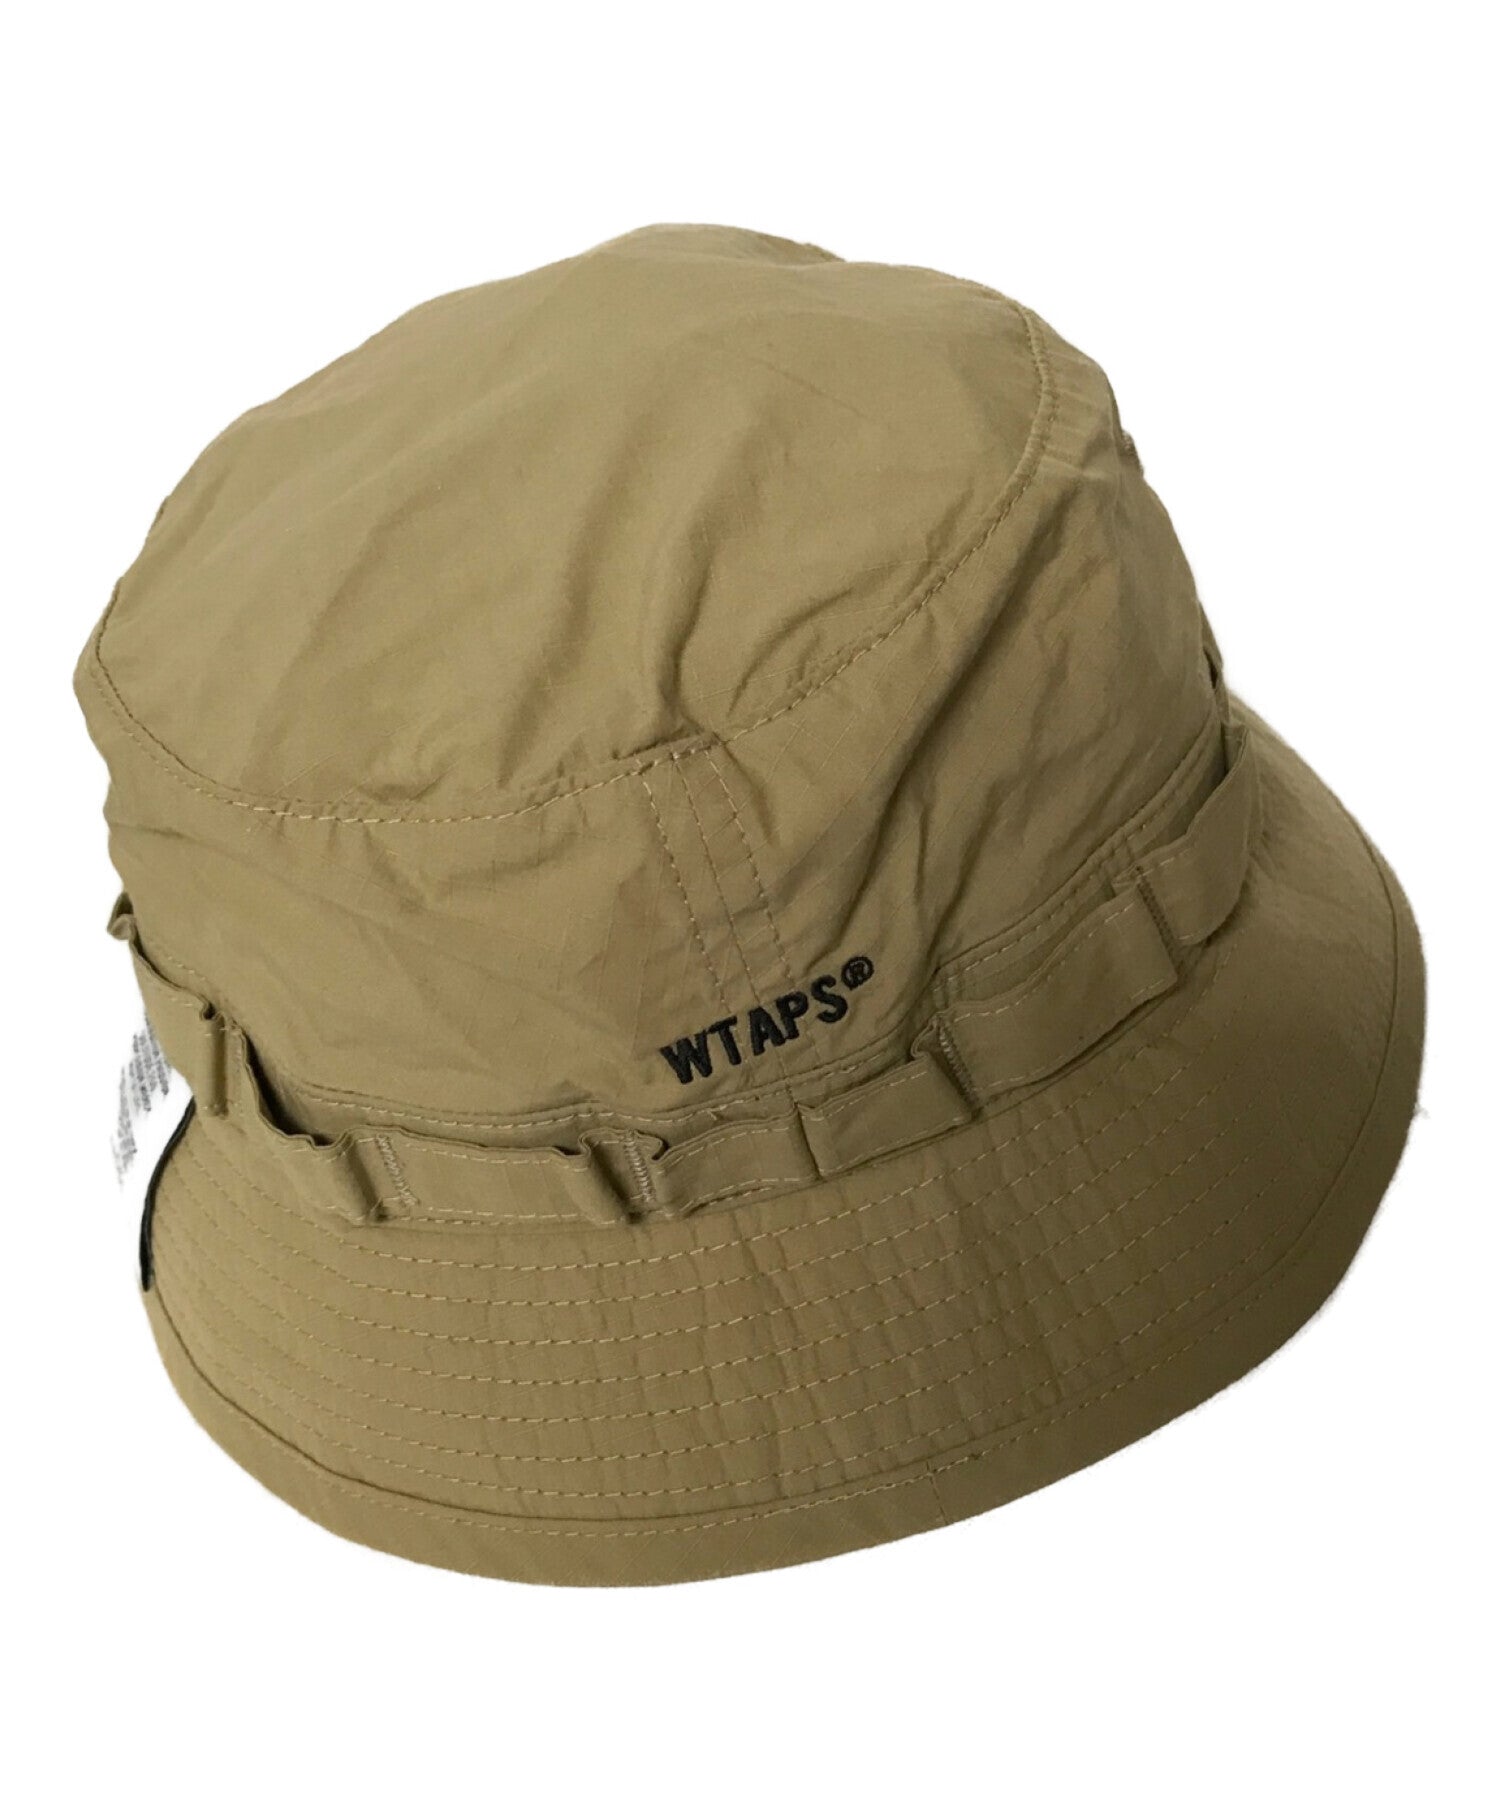 WTAPS 22SS JUNGLE 01 / HAT / NYCO. | Archive Factory